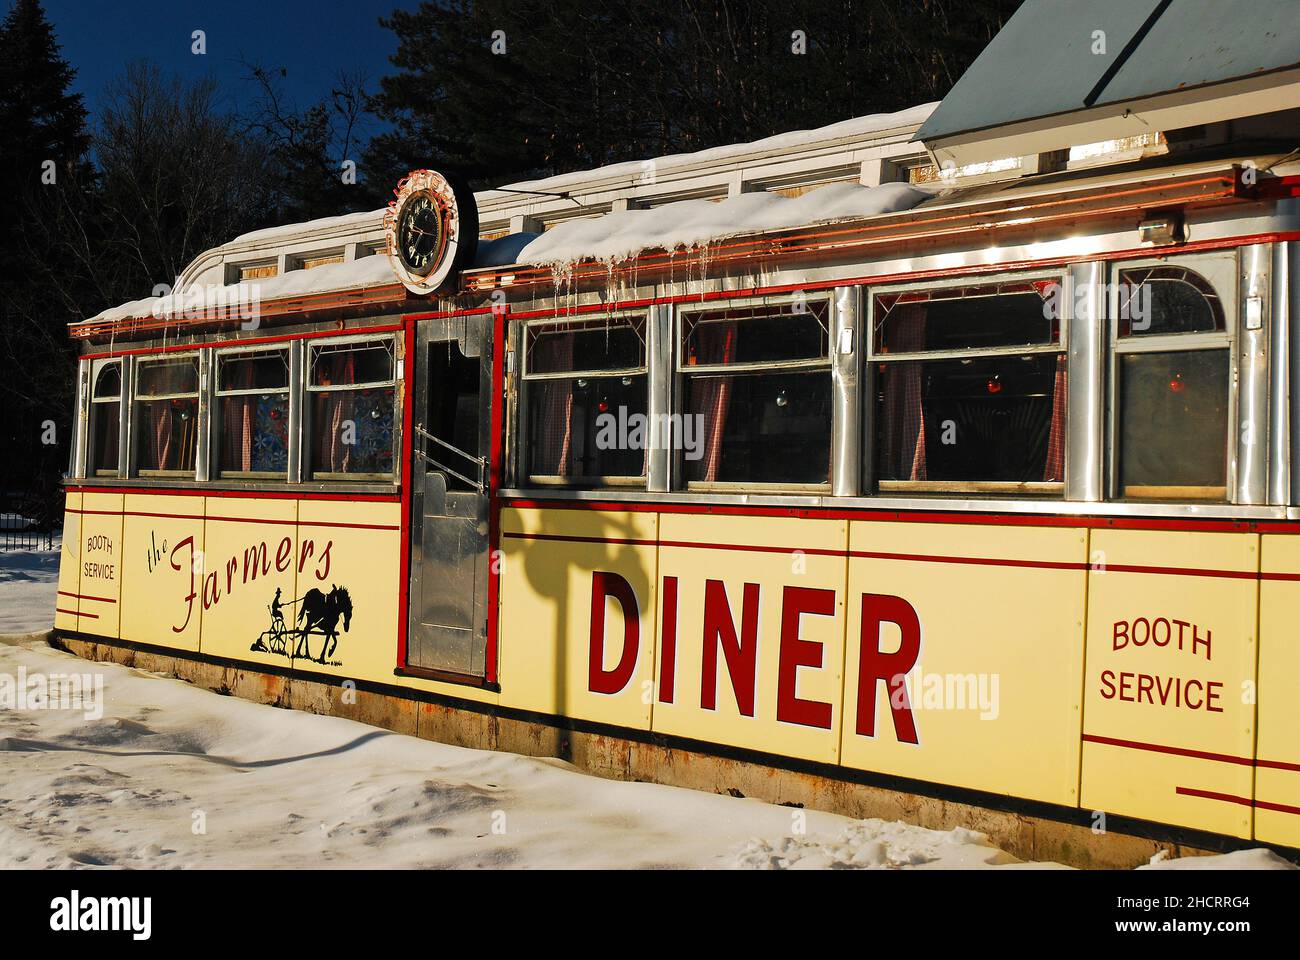 Farmers Diner Stock Photo